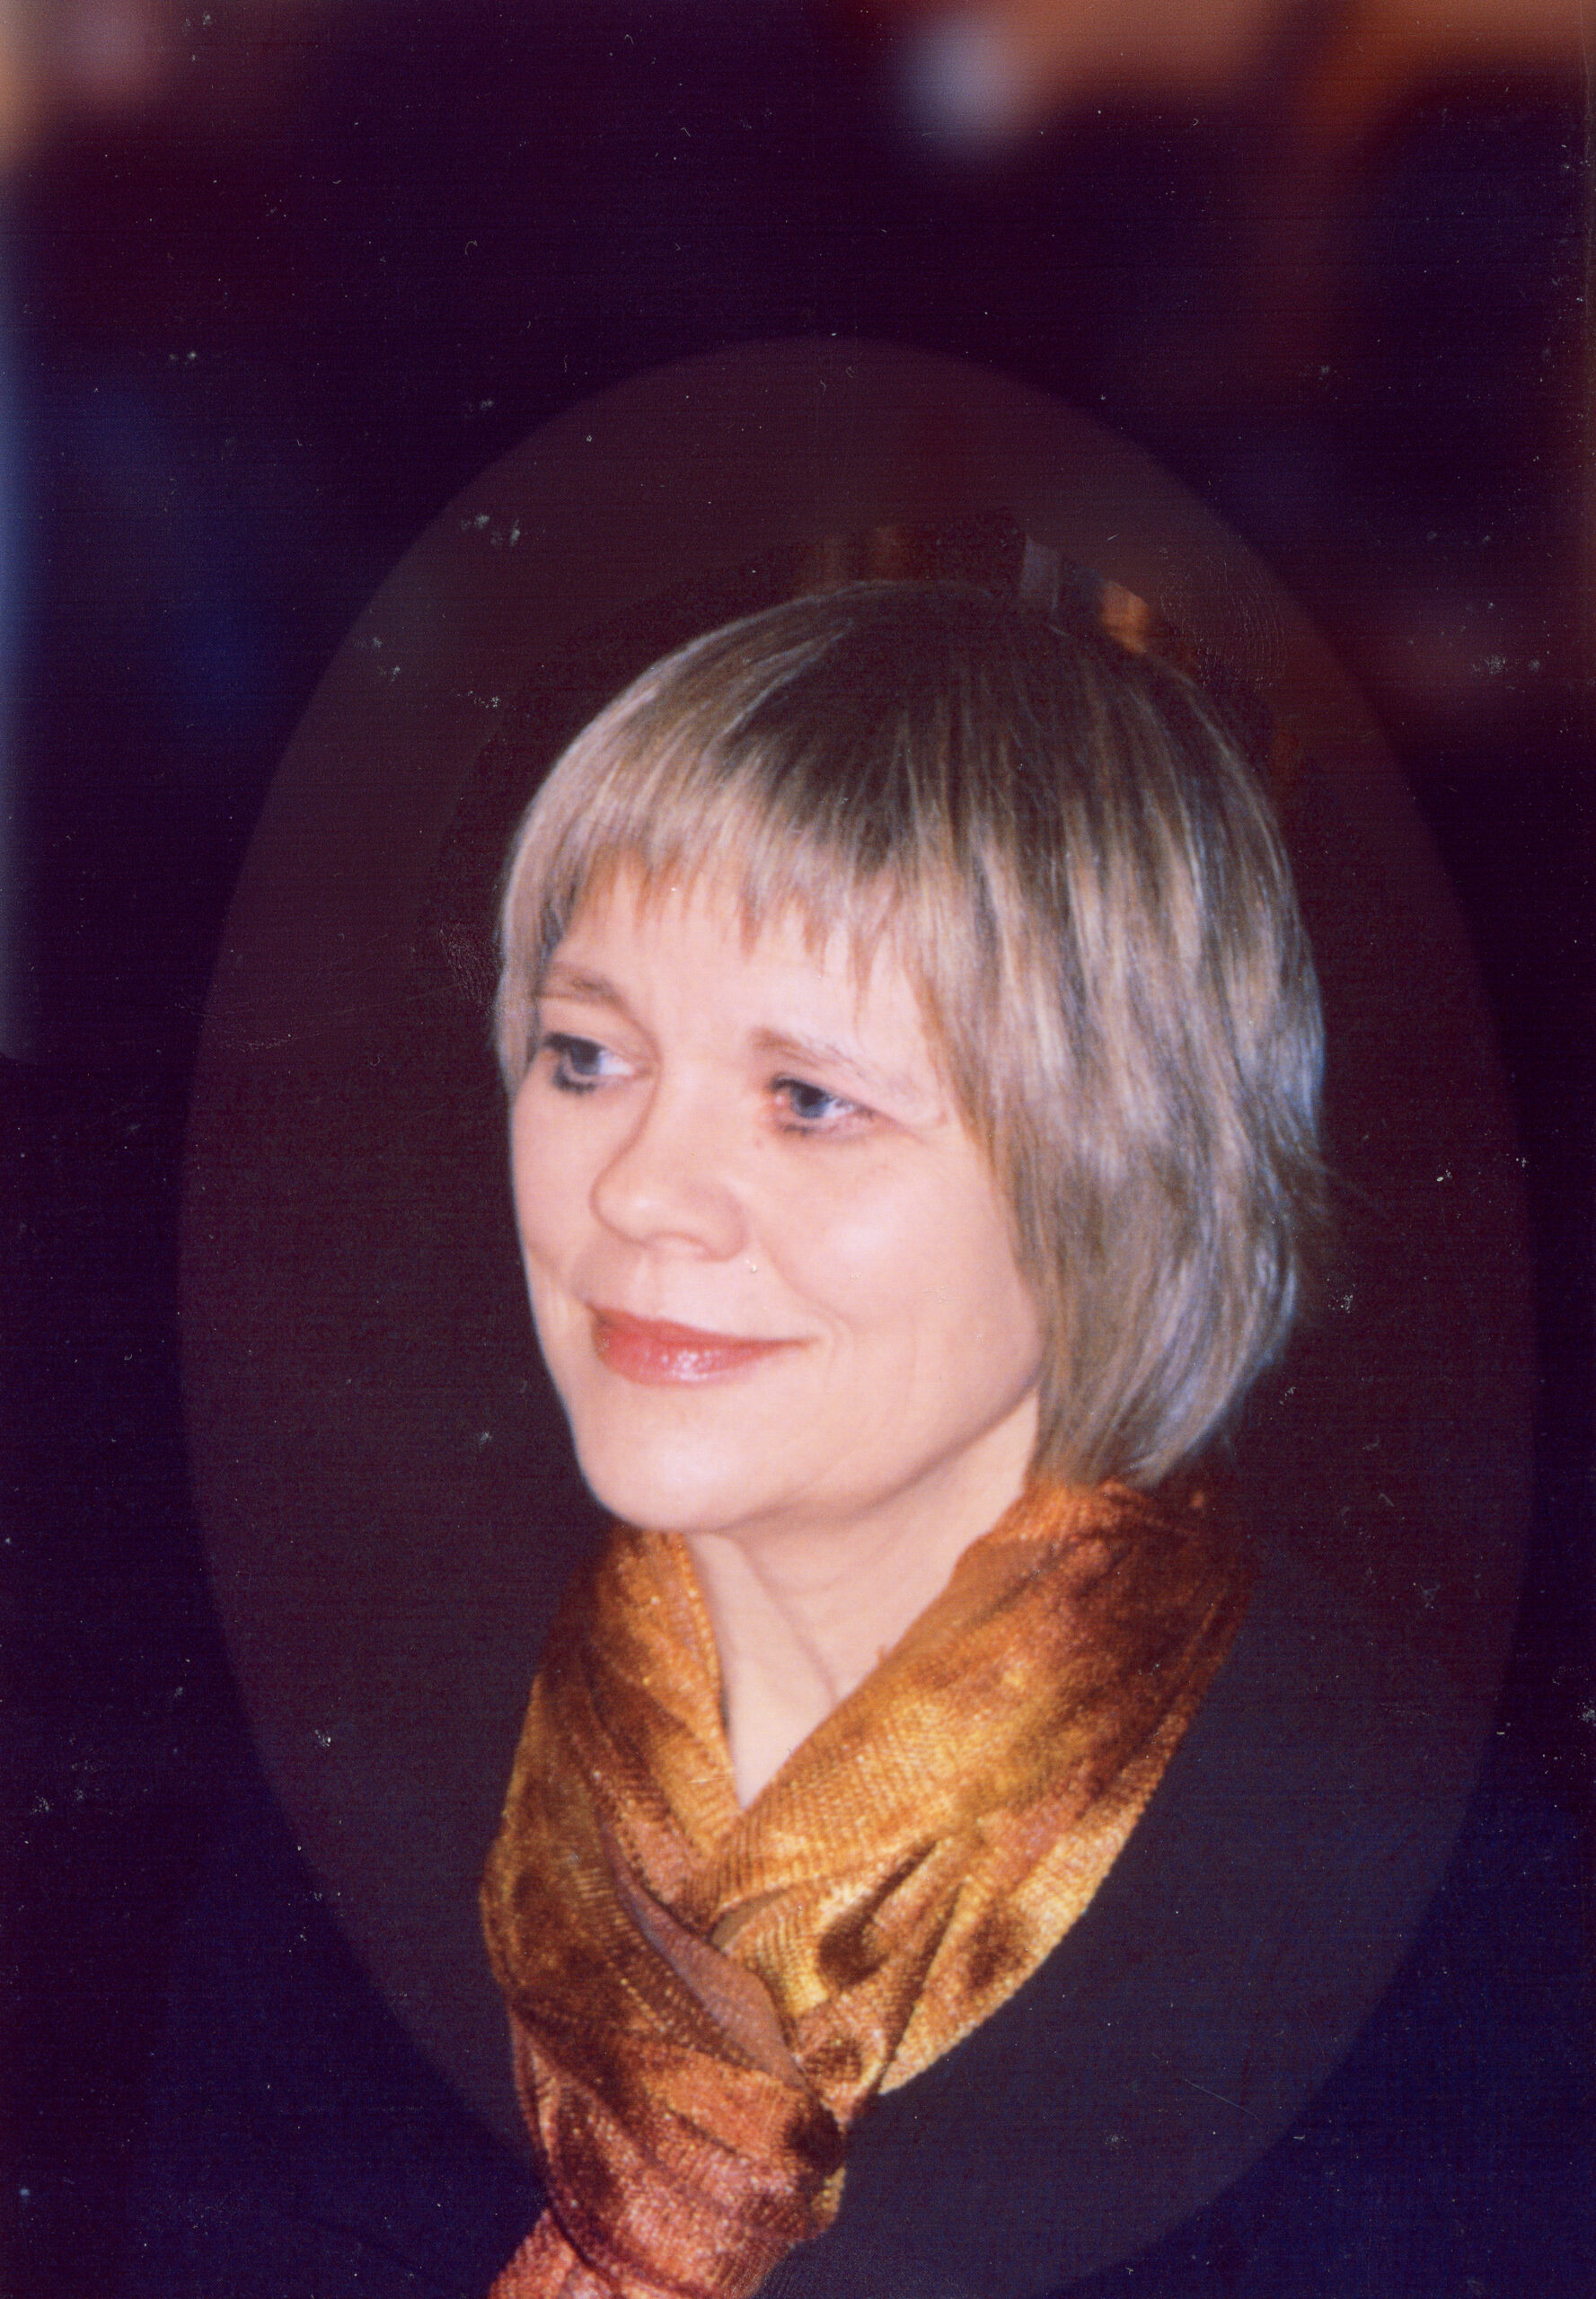 Photo of the author, Jannie Edwards. Against a black backdrop, she is wearing a black top and a golden scarf, and her blond hair sits at her shoulders.